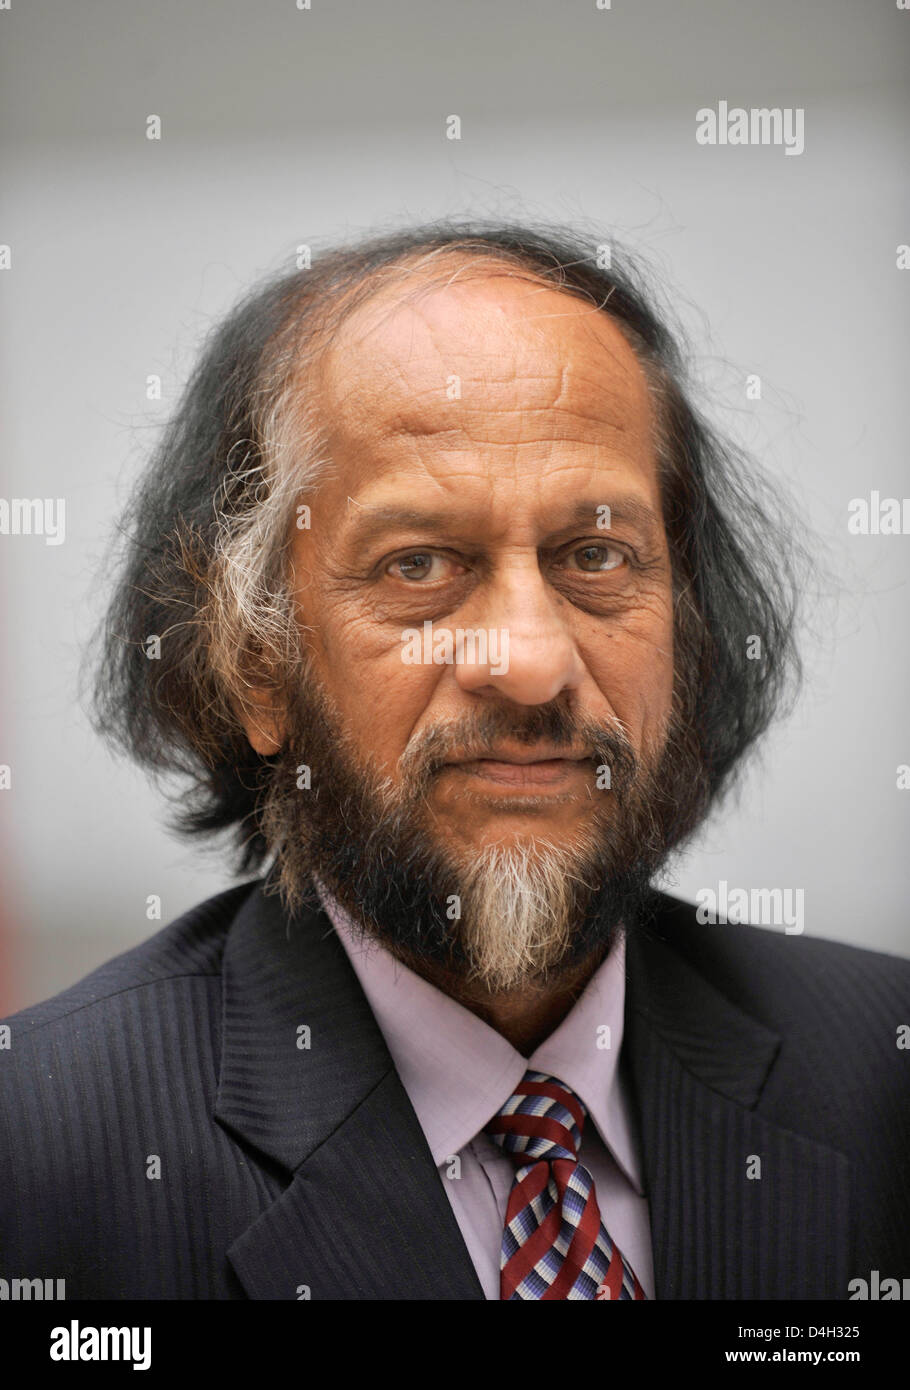 Rajendra Pachauri, chair of the Intergovernmental Panel on Climate Change (IPCC), is pictured in Berlin, Germany, 16 October 2008. Photo: GERO BRELOER Stock Photo